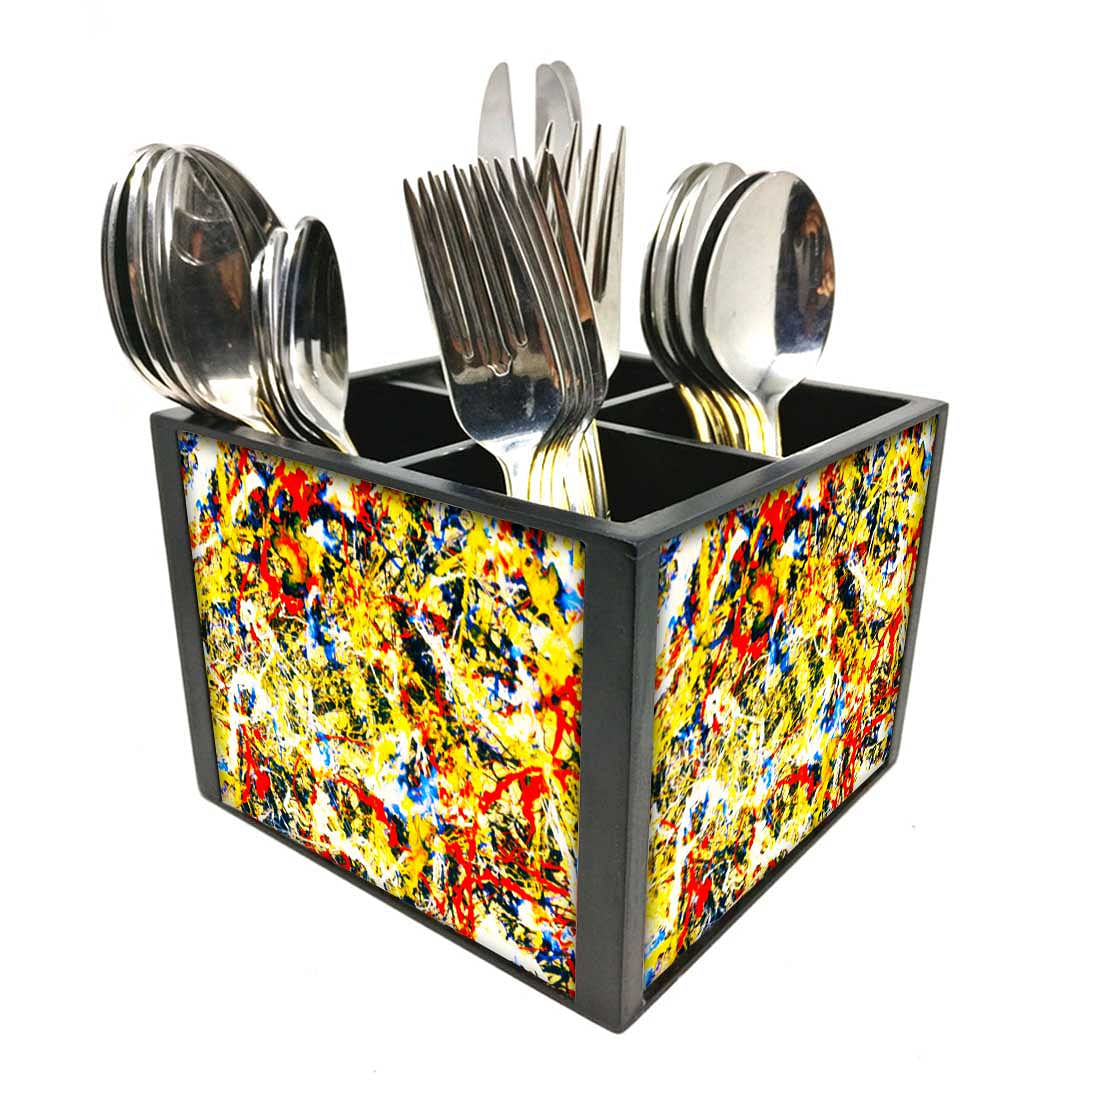 Pollock Cutlery Holder Stand Silverware Caddy Organizer for Spoons, Forks & Knives-Made of Pinewood Nutcase